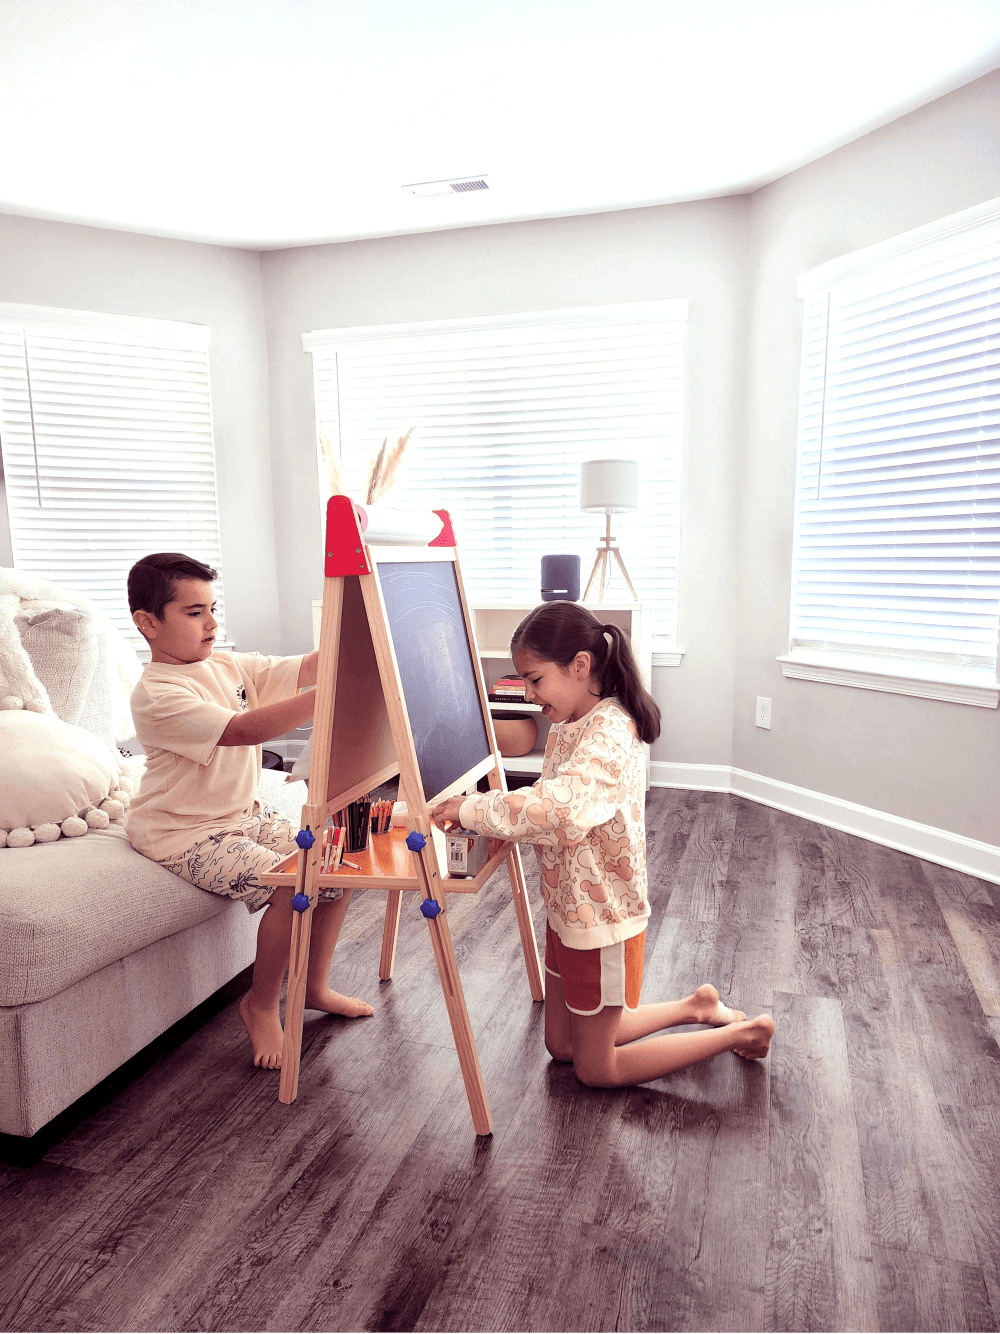 Tiny Land® Double-Sided Easel for Kids, Tiny Land Offical Store®